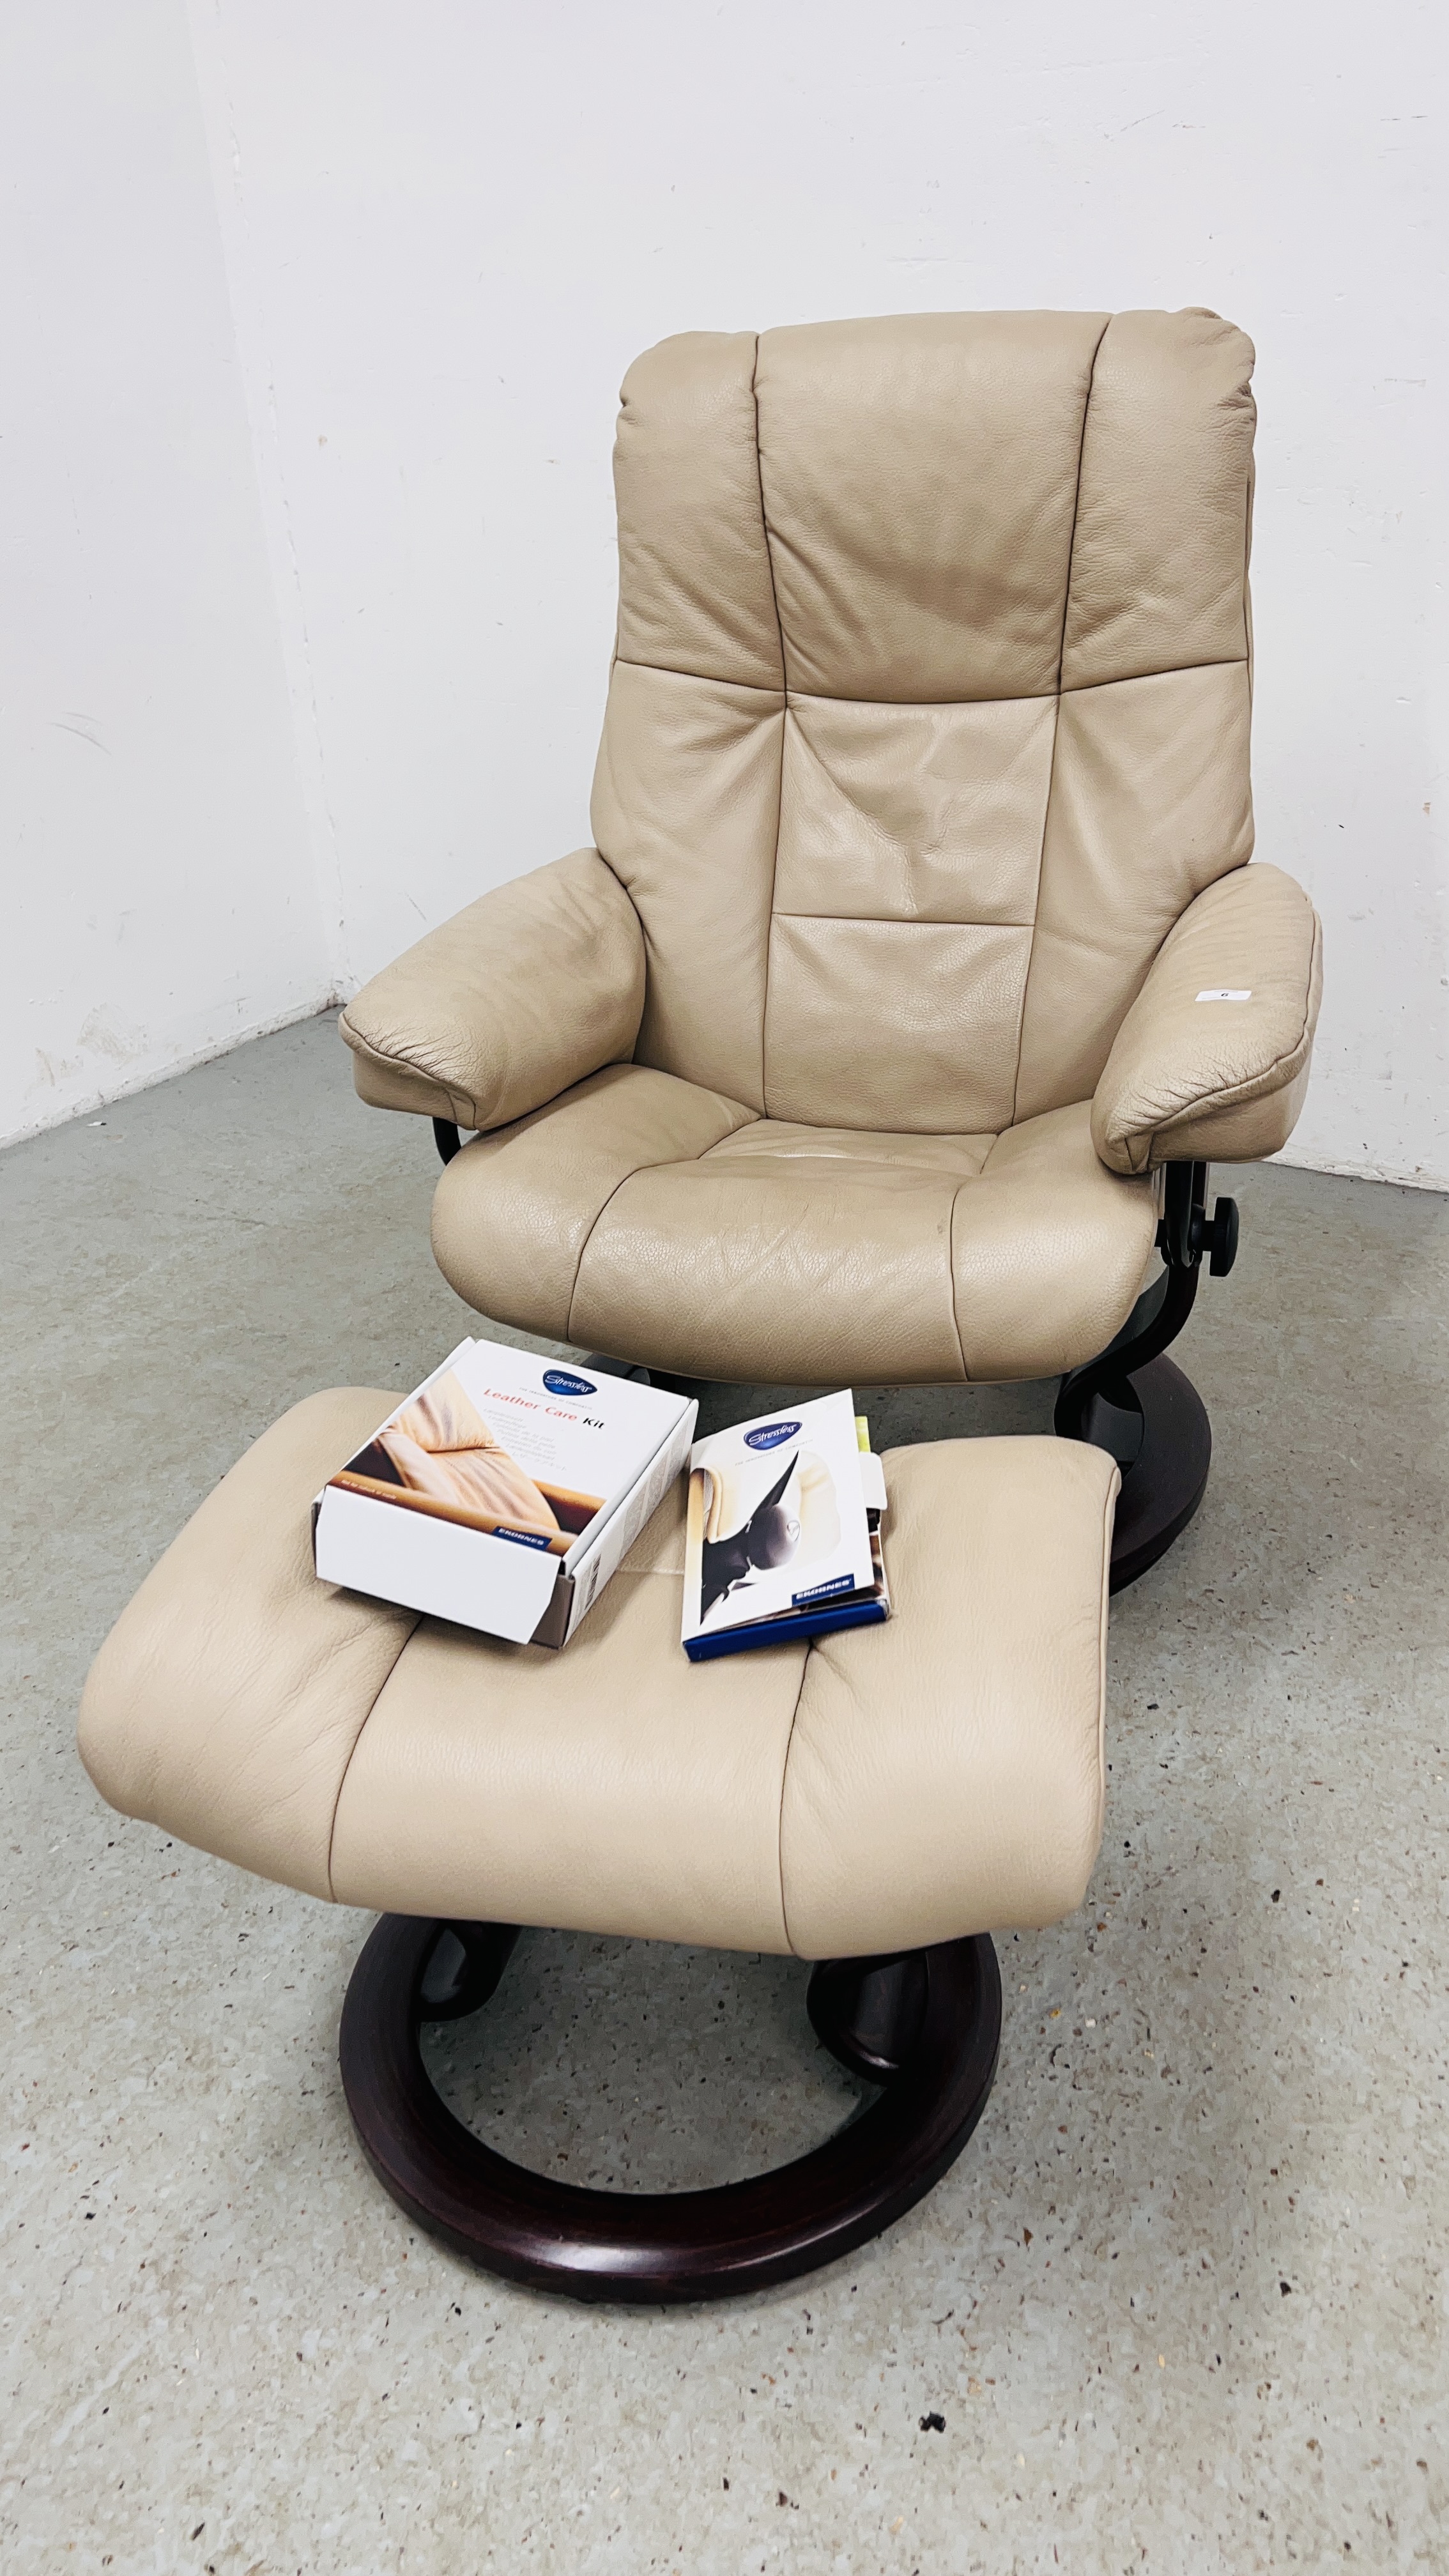 A GOOD QUALITY STRESSLESS CREAM LEATHER RELAXER CHAIR WITH MATCHING FOOTSTOOL.